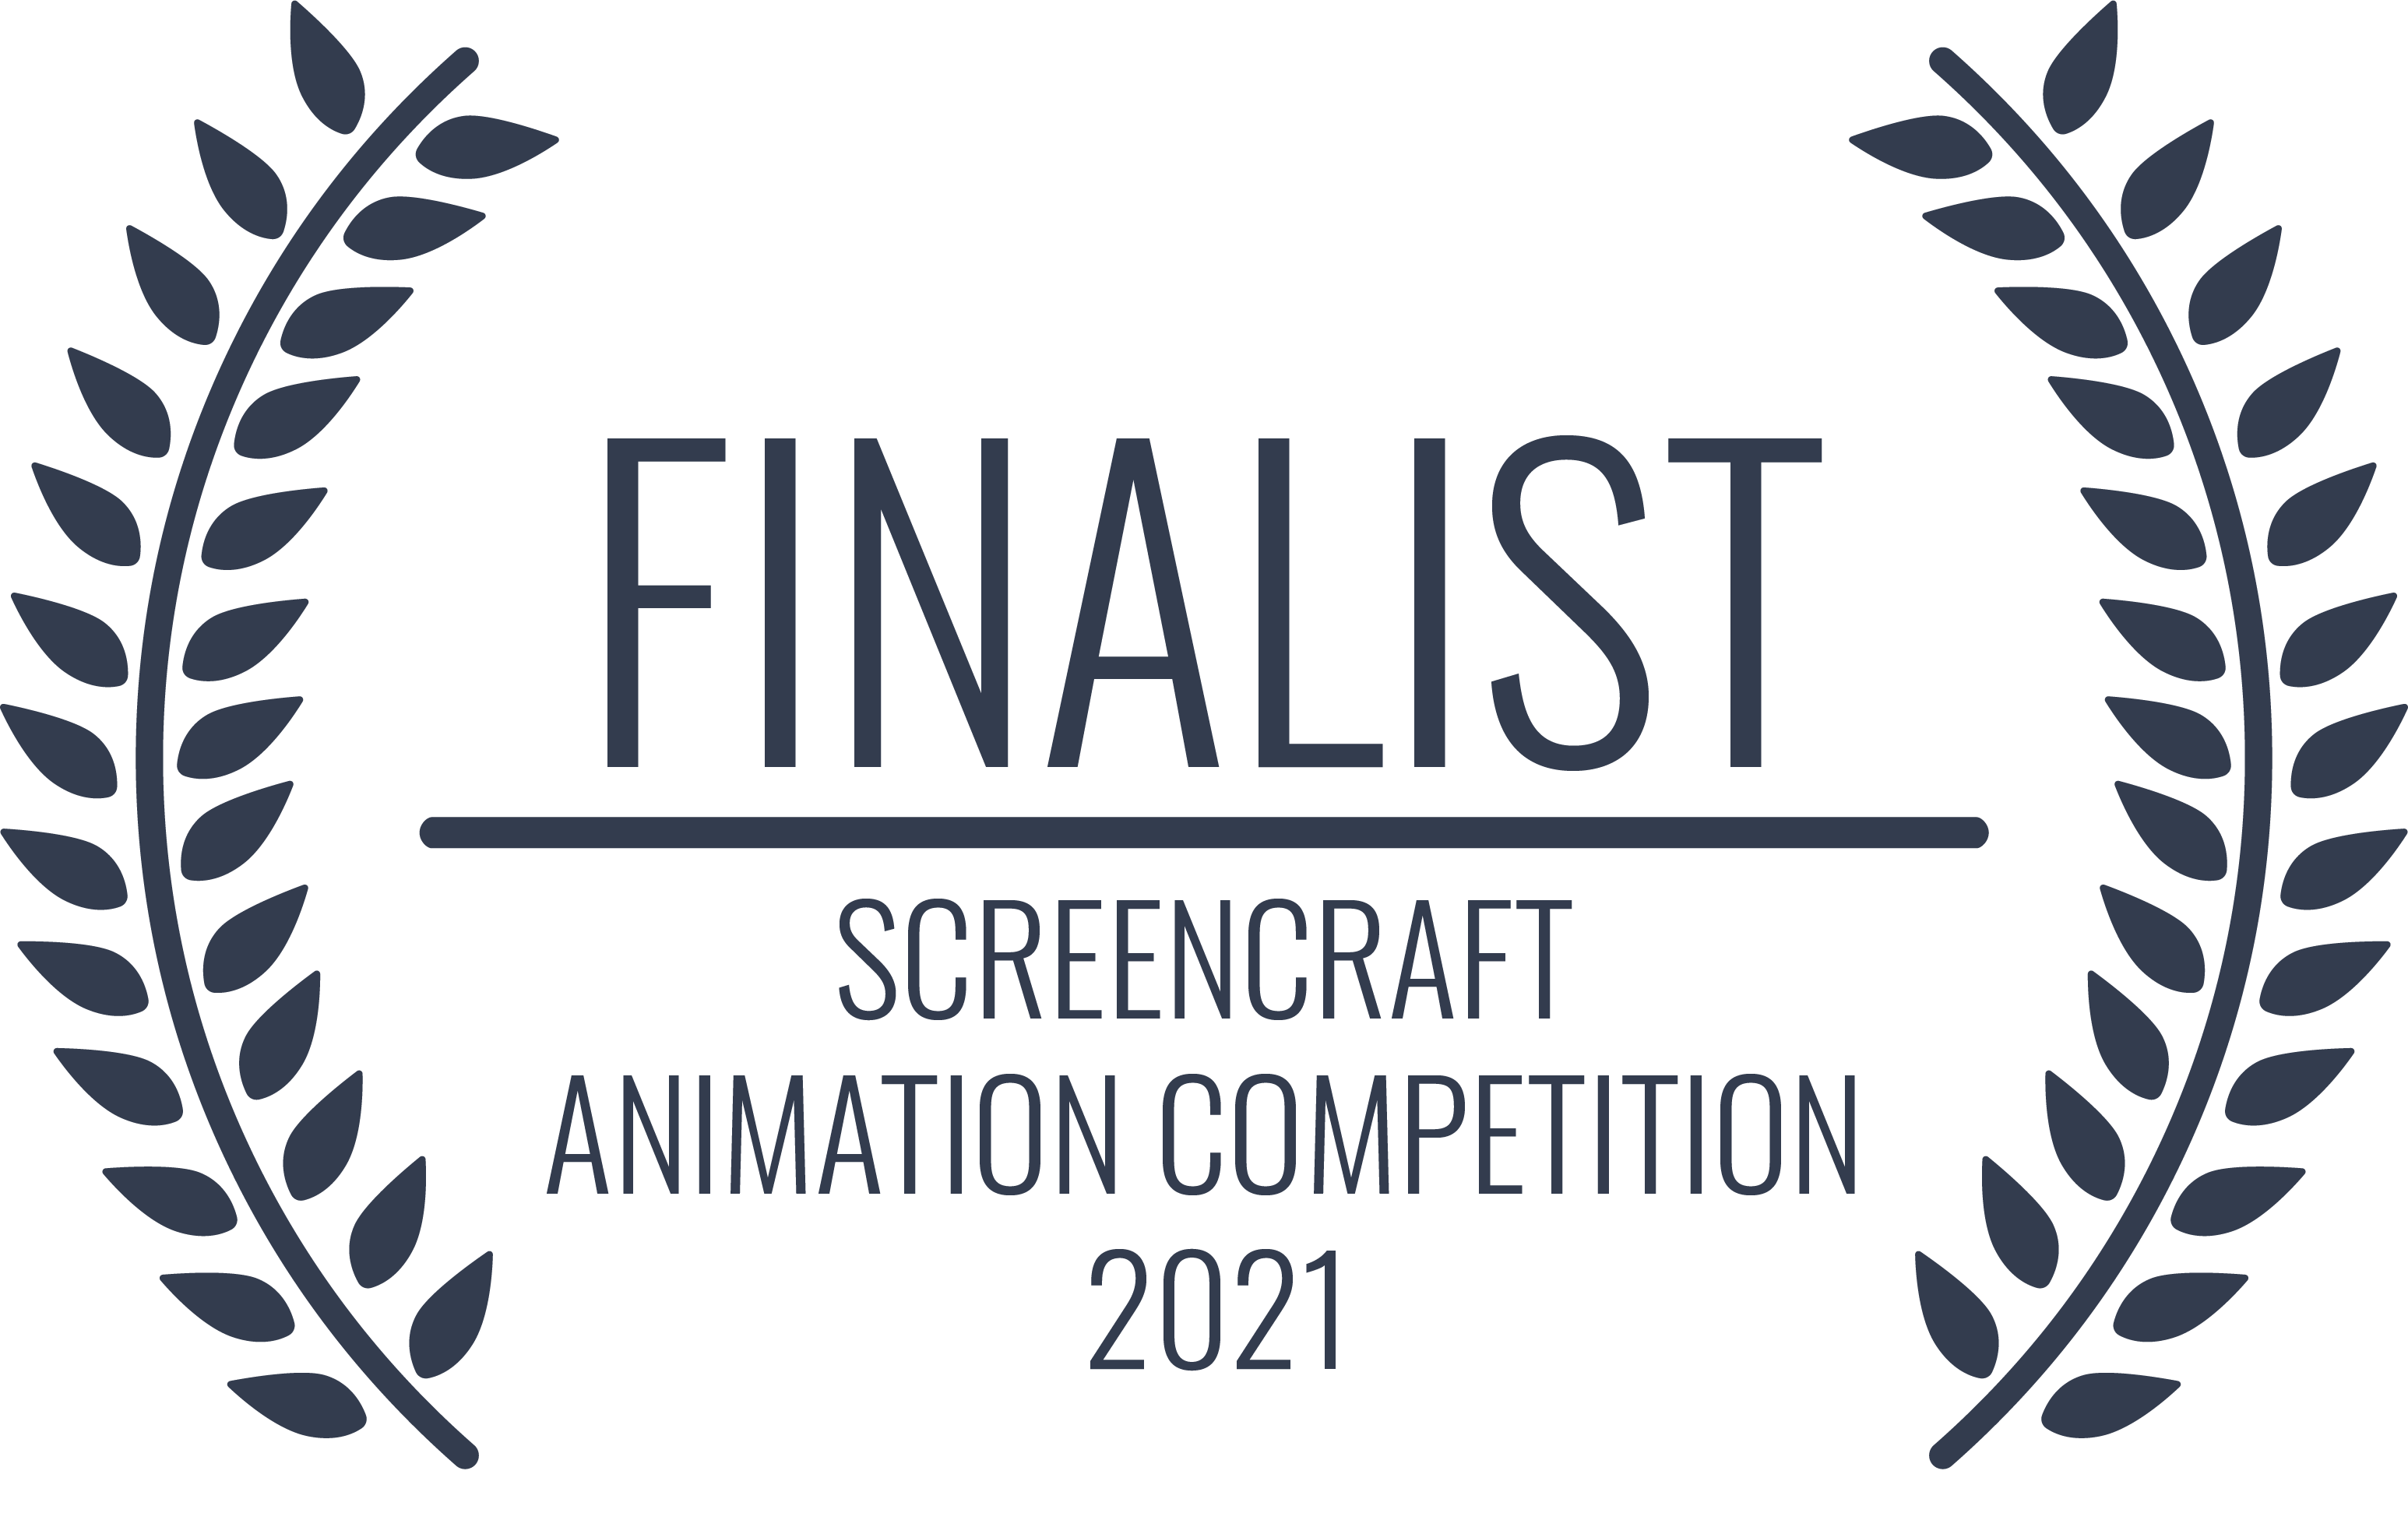 Scary Screencraft Finalist